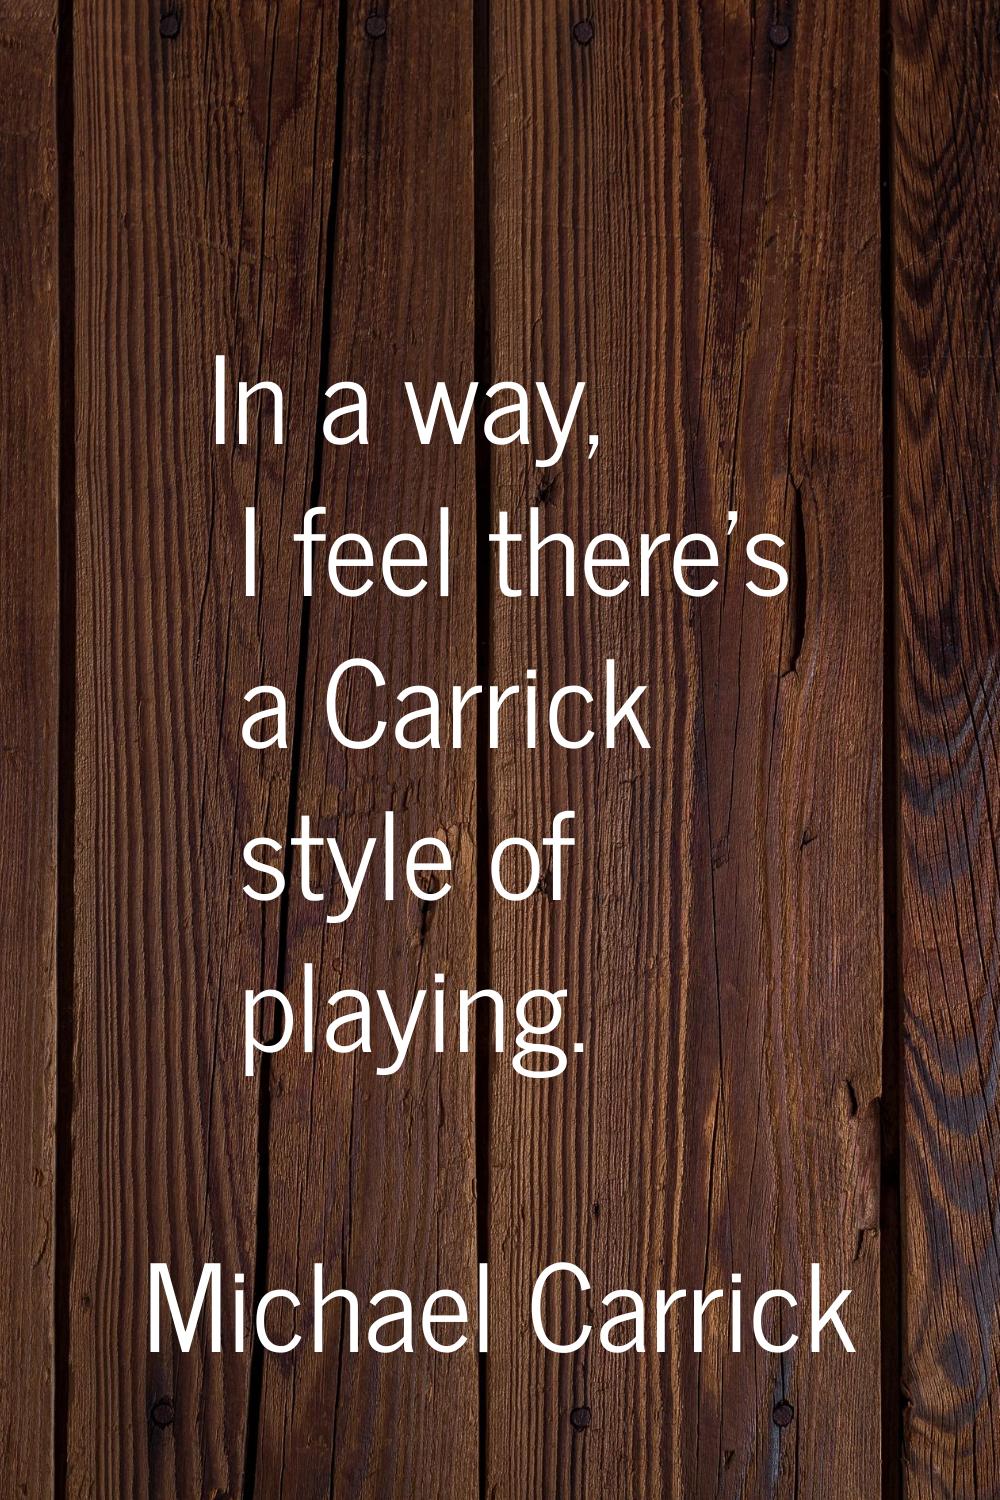 In a way, I feel there's a Carrick style of playing.